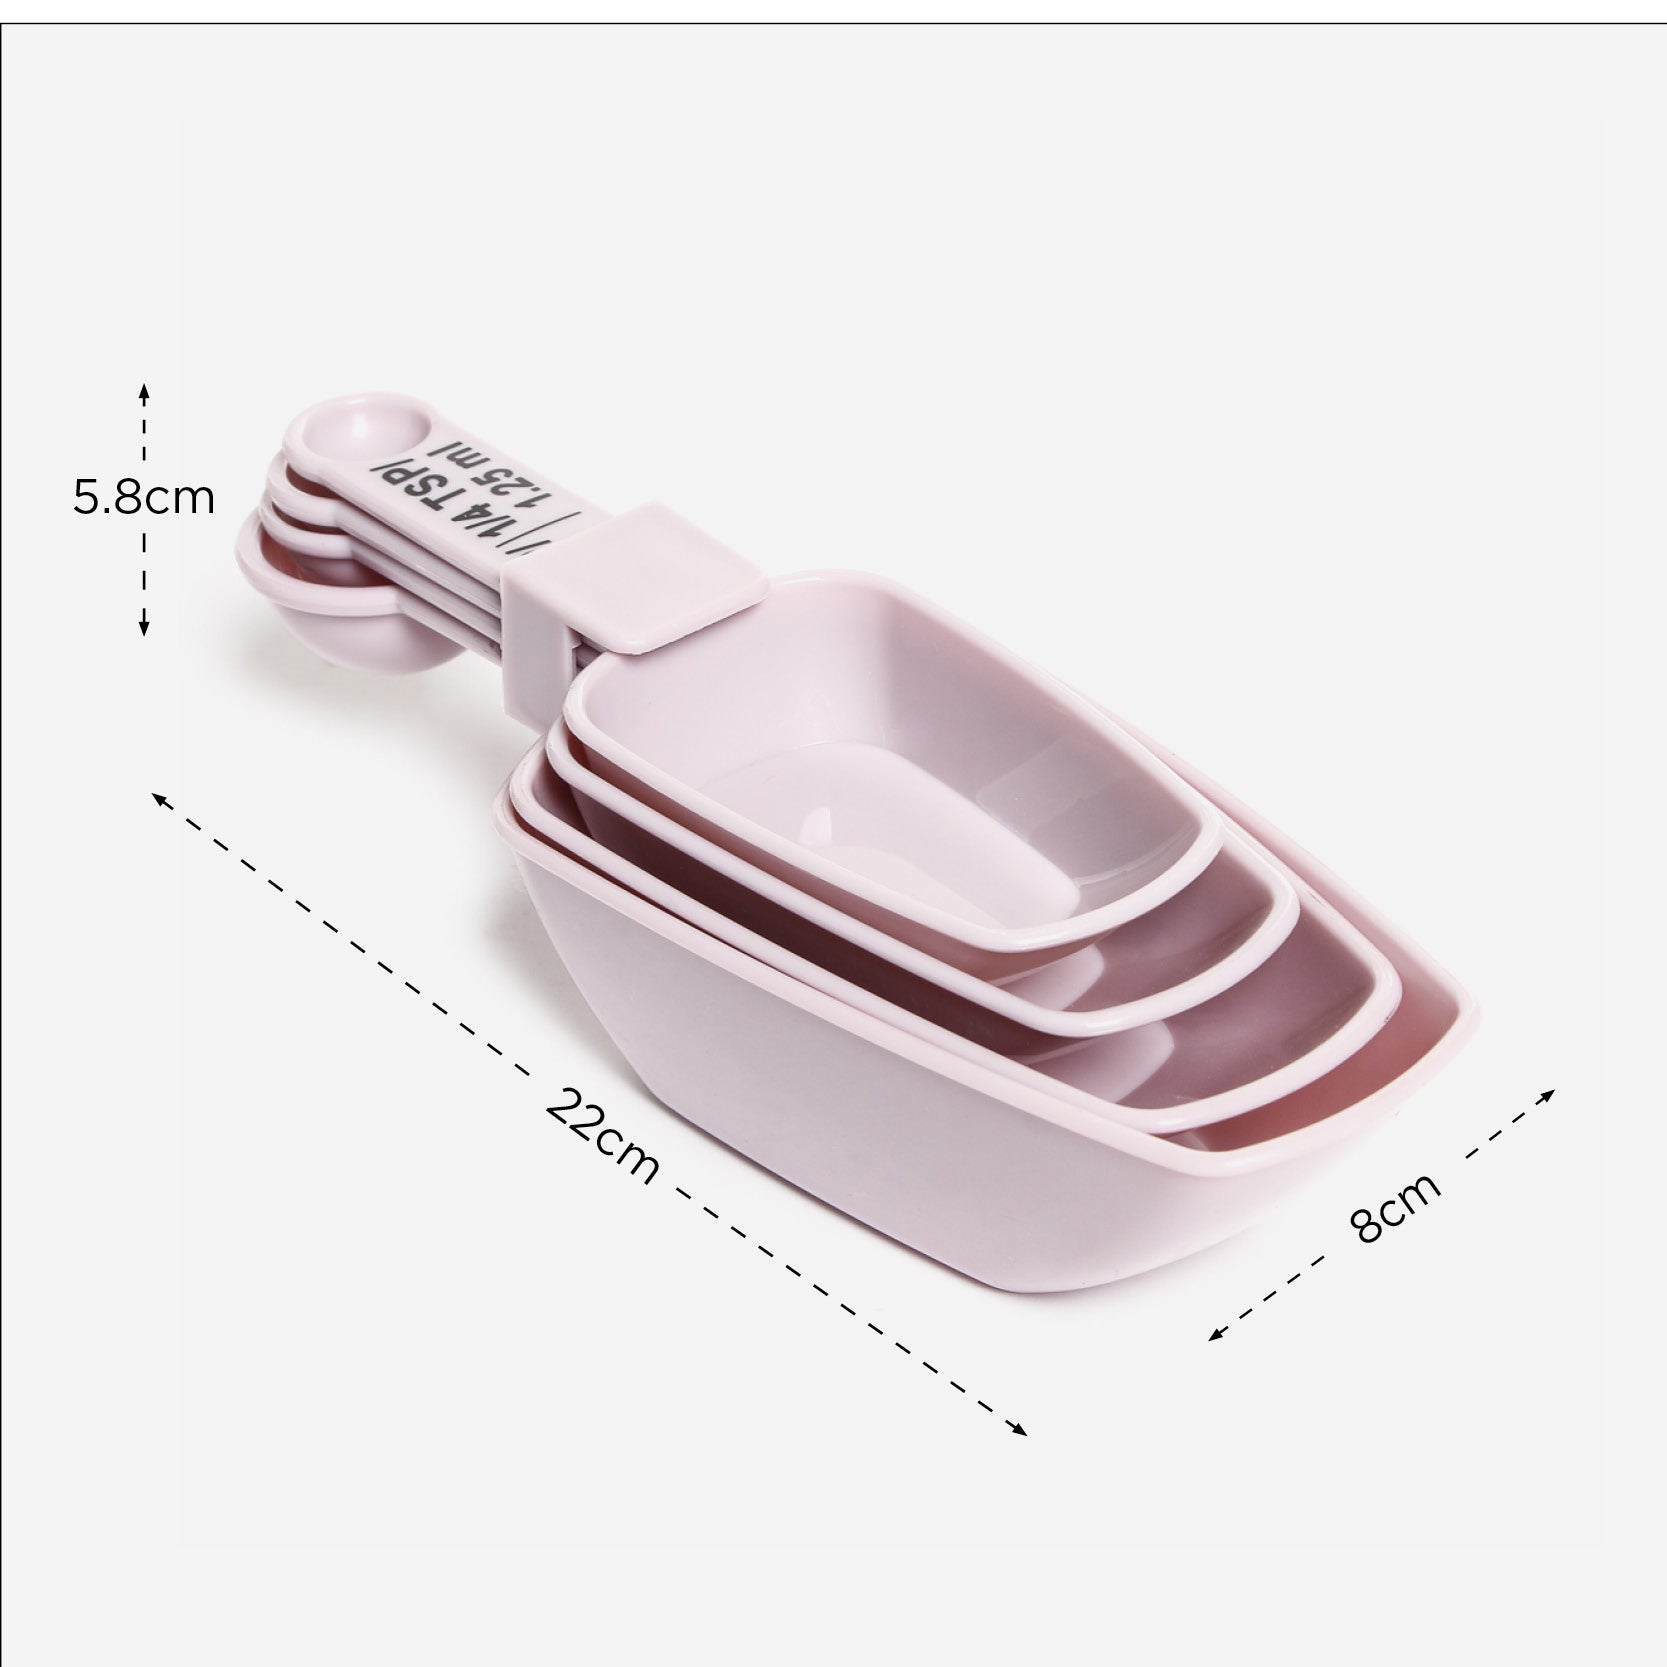 https://cdn.shopify.com/s/files/1/0450/5265/7817/products/Set_20of_204_20measuring_20cups_20with_20measuring_20spoons_20Lilac-_2010425949-4_7da09e46-f7d3-4200-a238-990a41fe79ff.jpg?v=1693481597